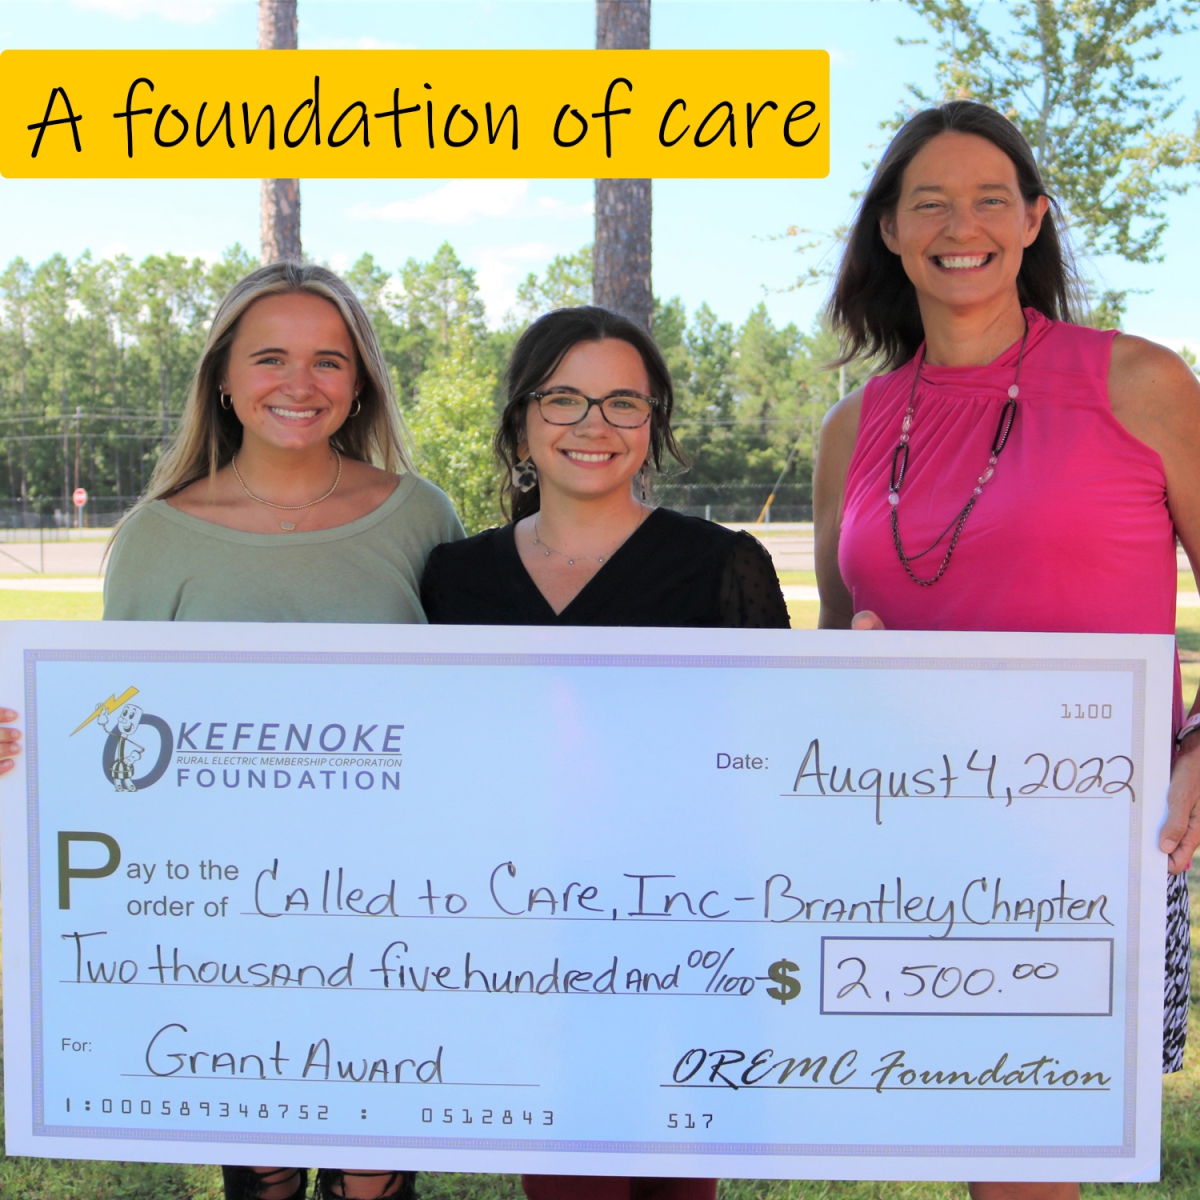 Foundation Grant Award Helps Support Foster Families  